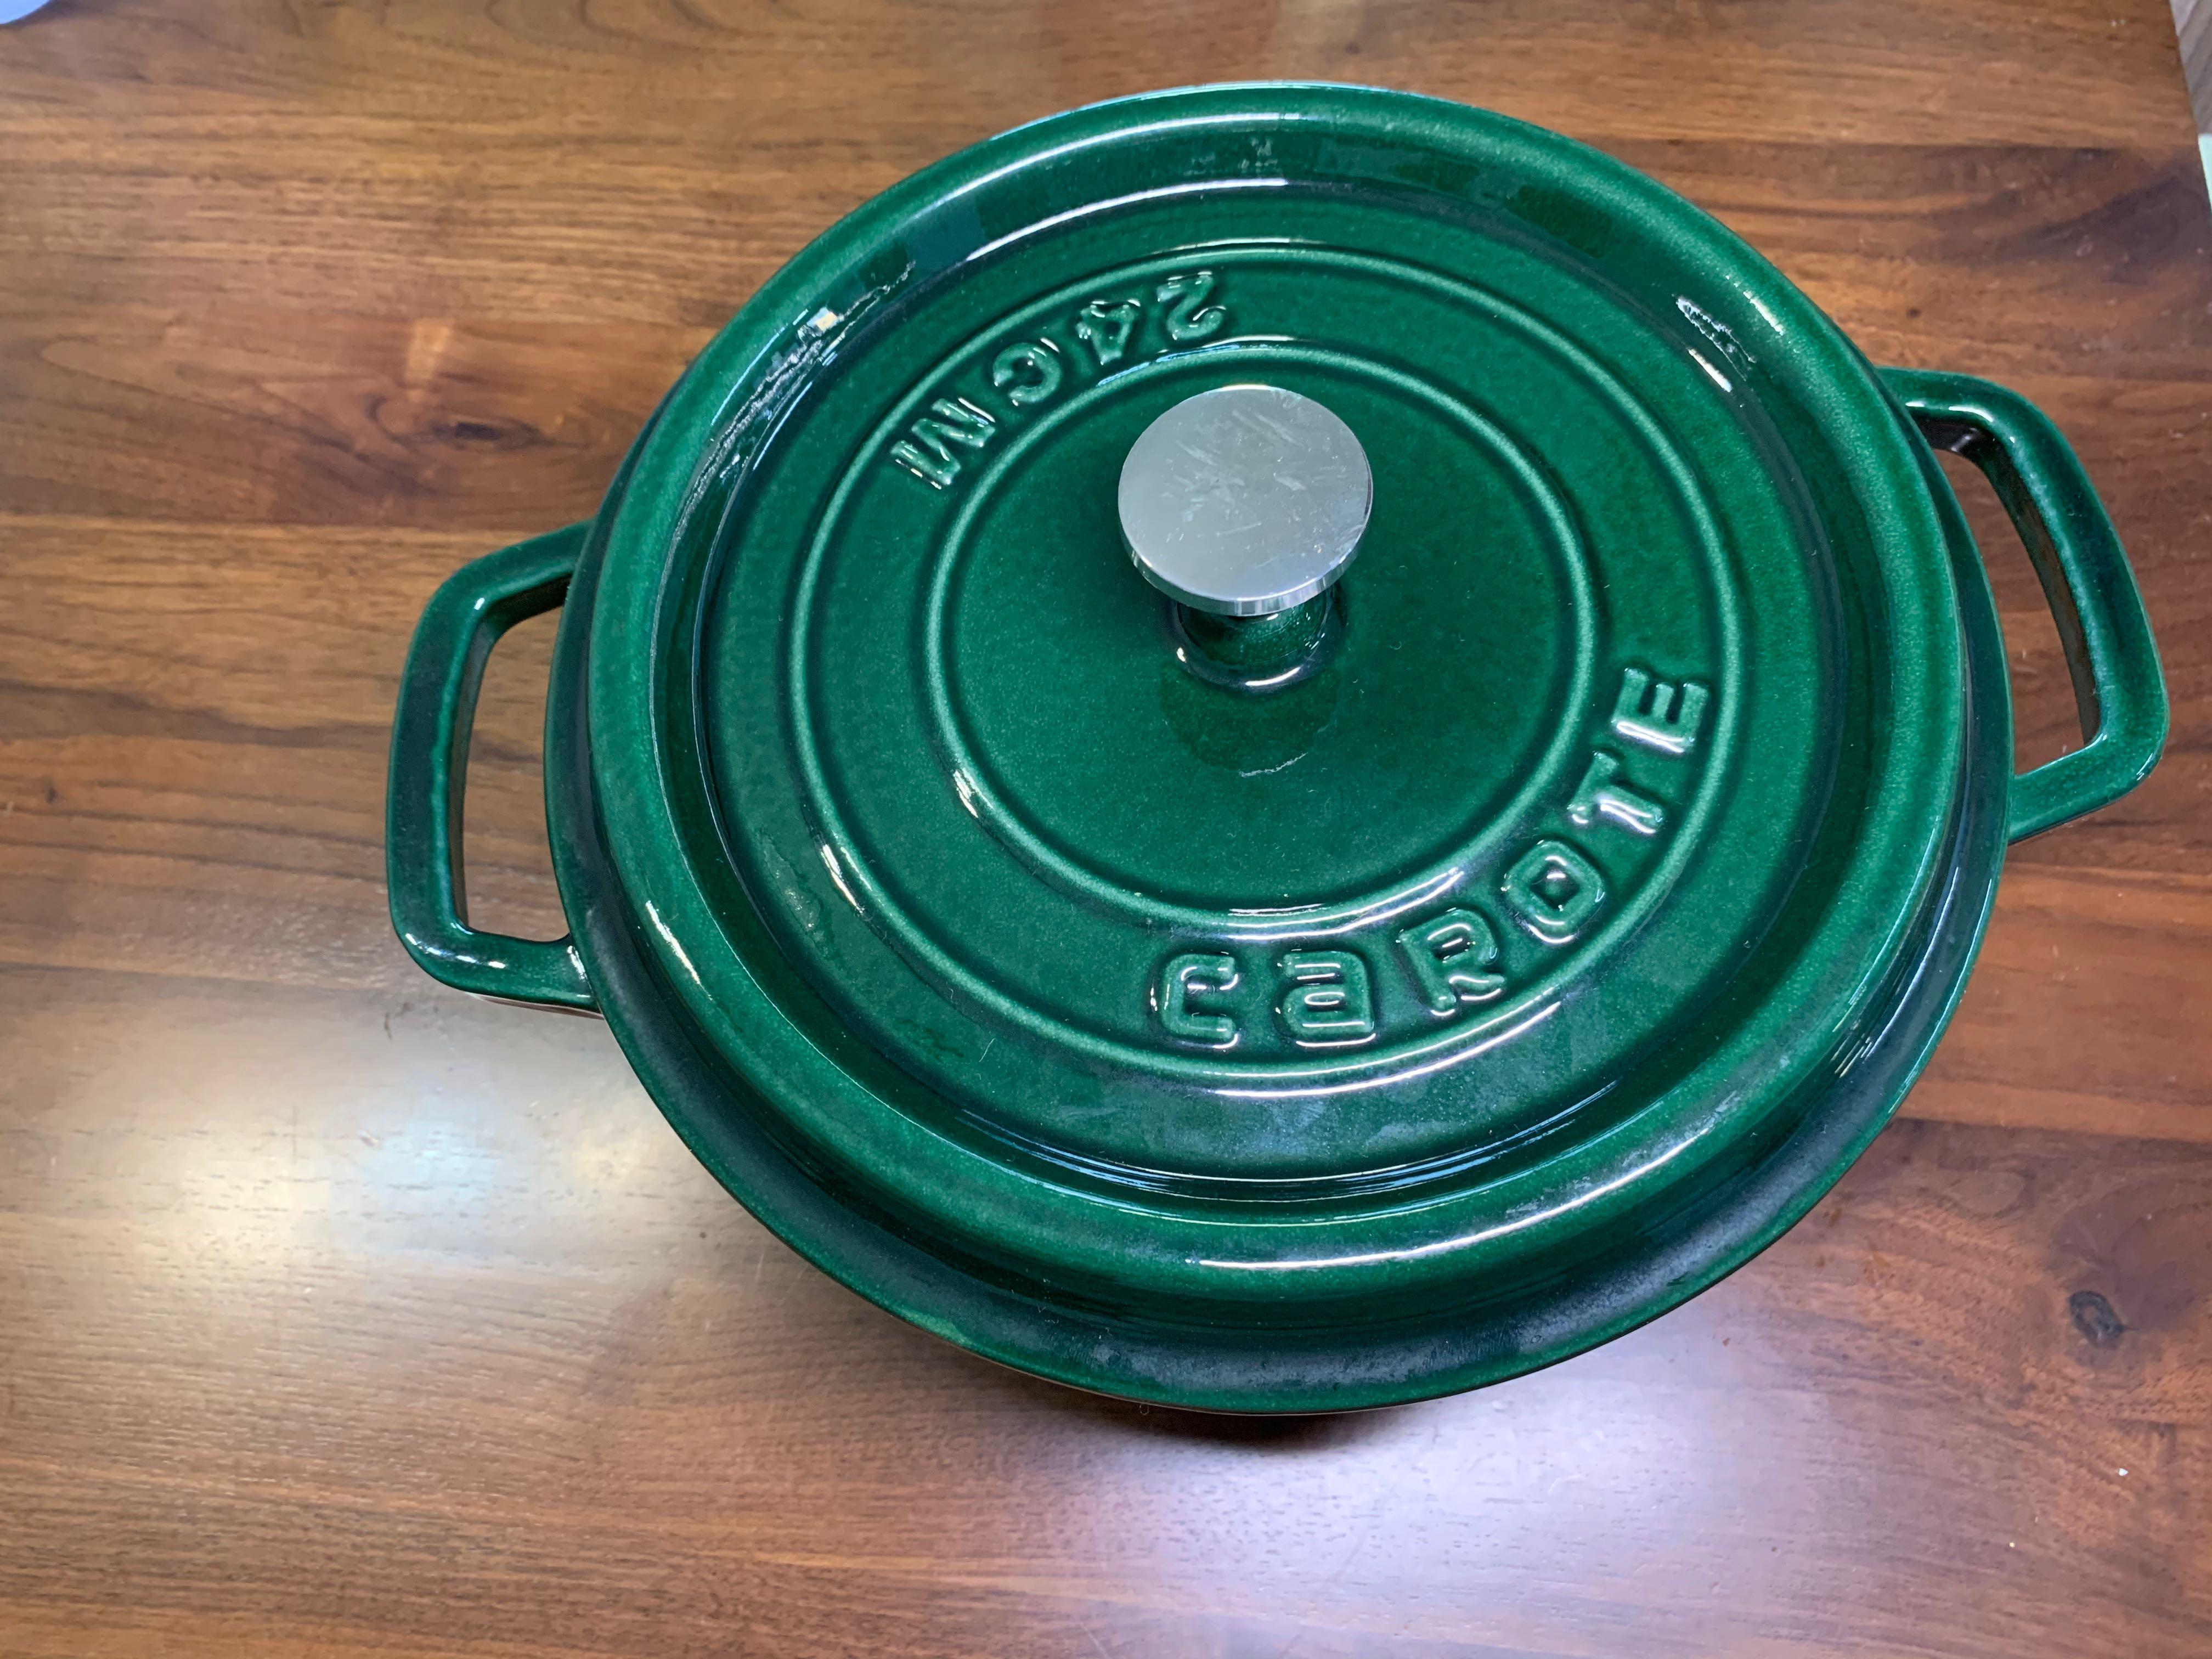 Carote Cast Iron Dutch Oven/Casserole, Furniture & Home Living, Kitchenware  & Tableware, Cookware & Accessories on Carousell